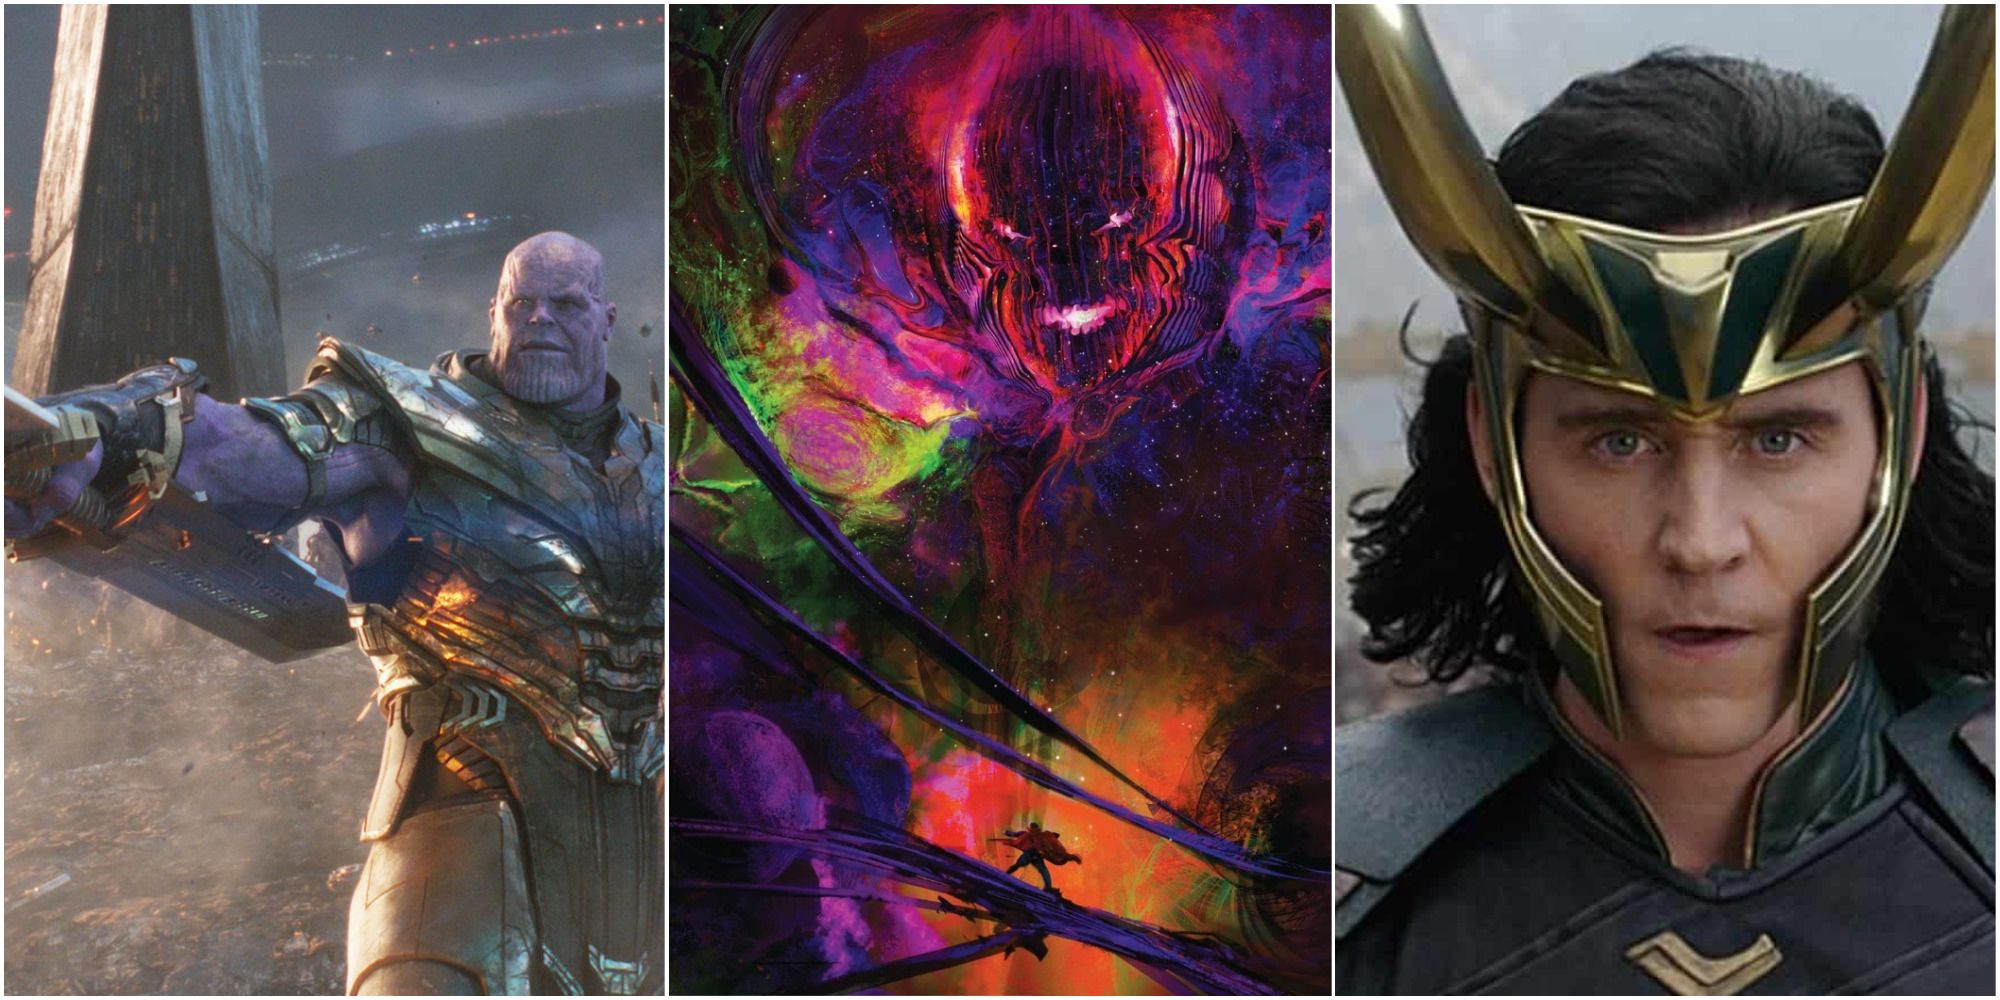 Avengers' Power Rankings: Who's the Strongest in the MCU?